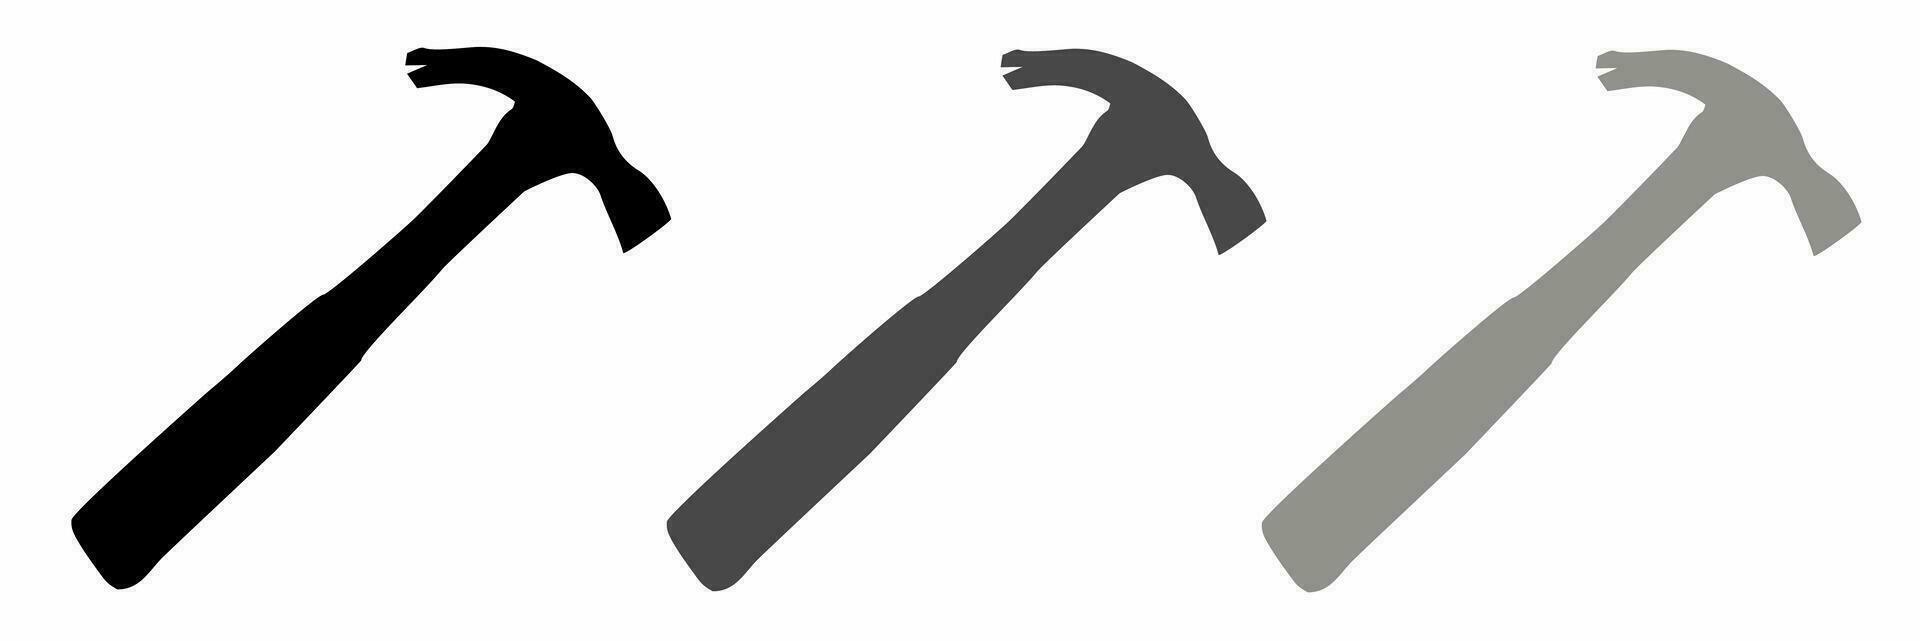 Hammer icon black white illustration collection. vector